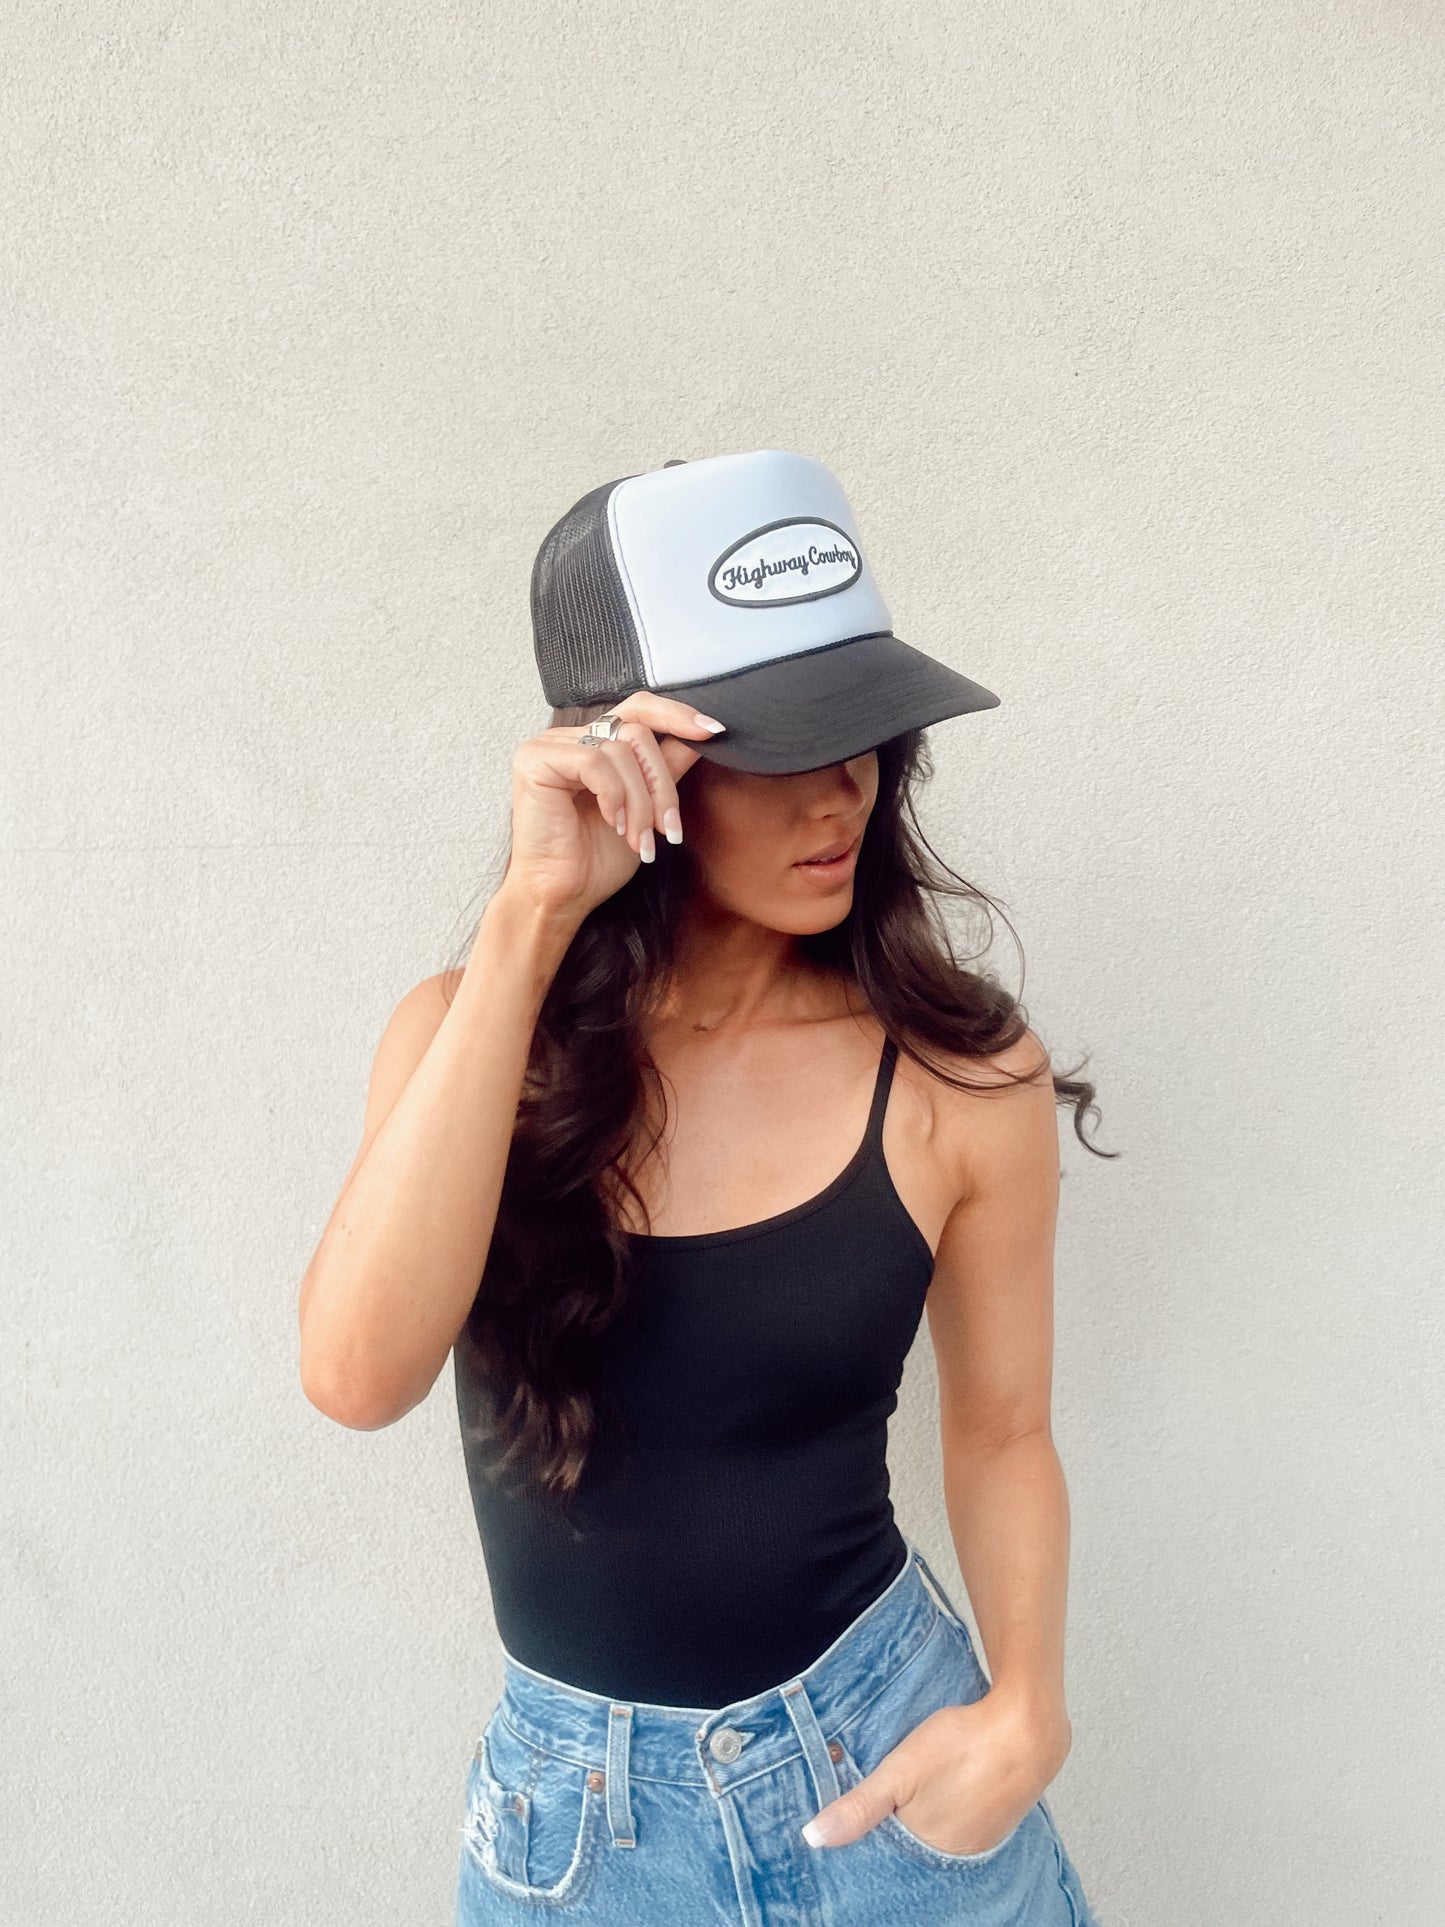 Highway Cowboy Patch Hat- White and Black